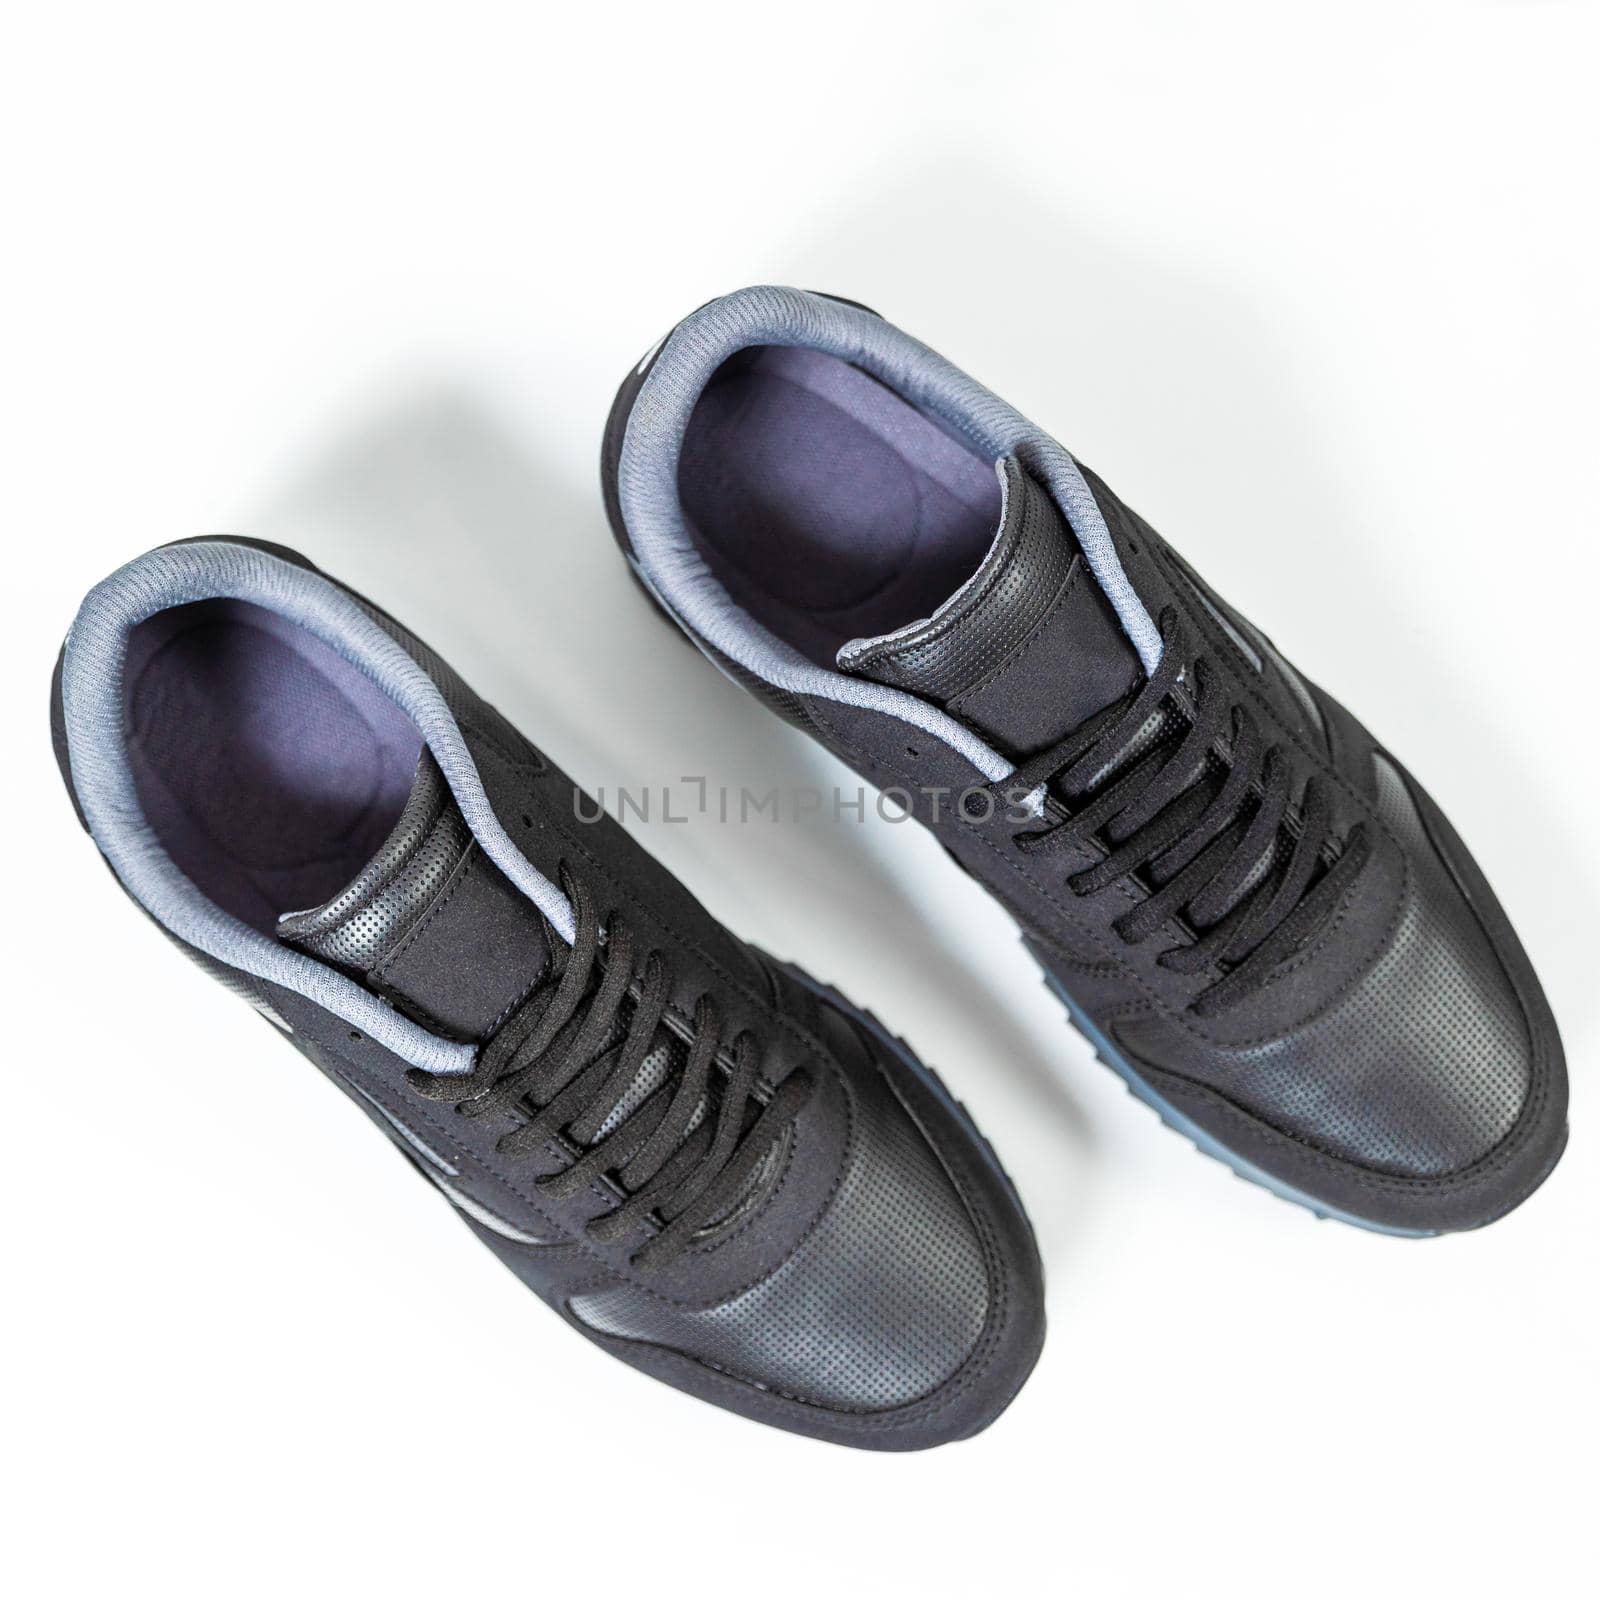 Black male sneakers shoes isolated background top view